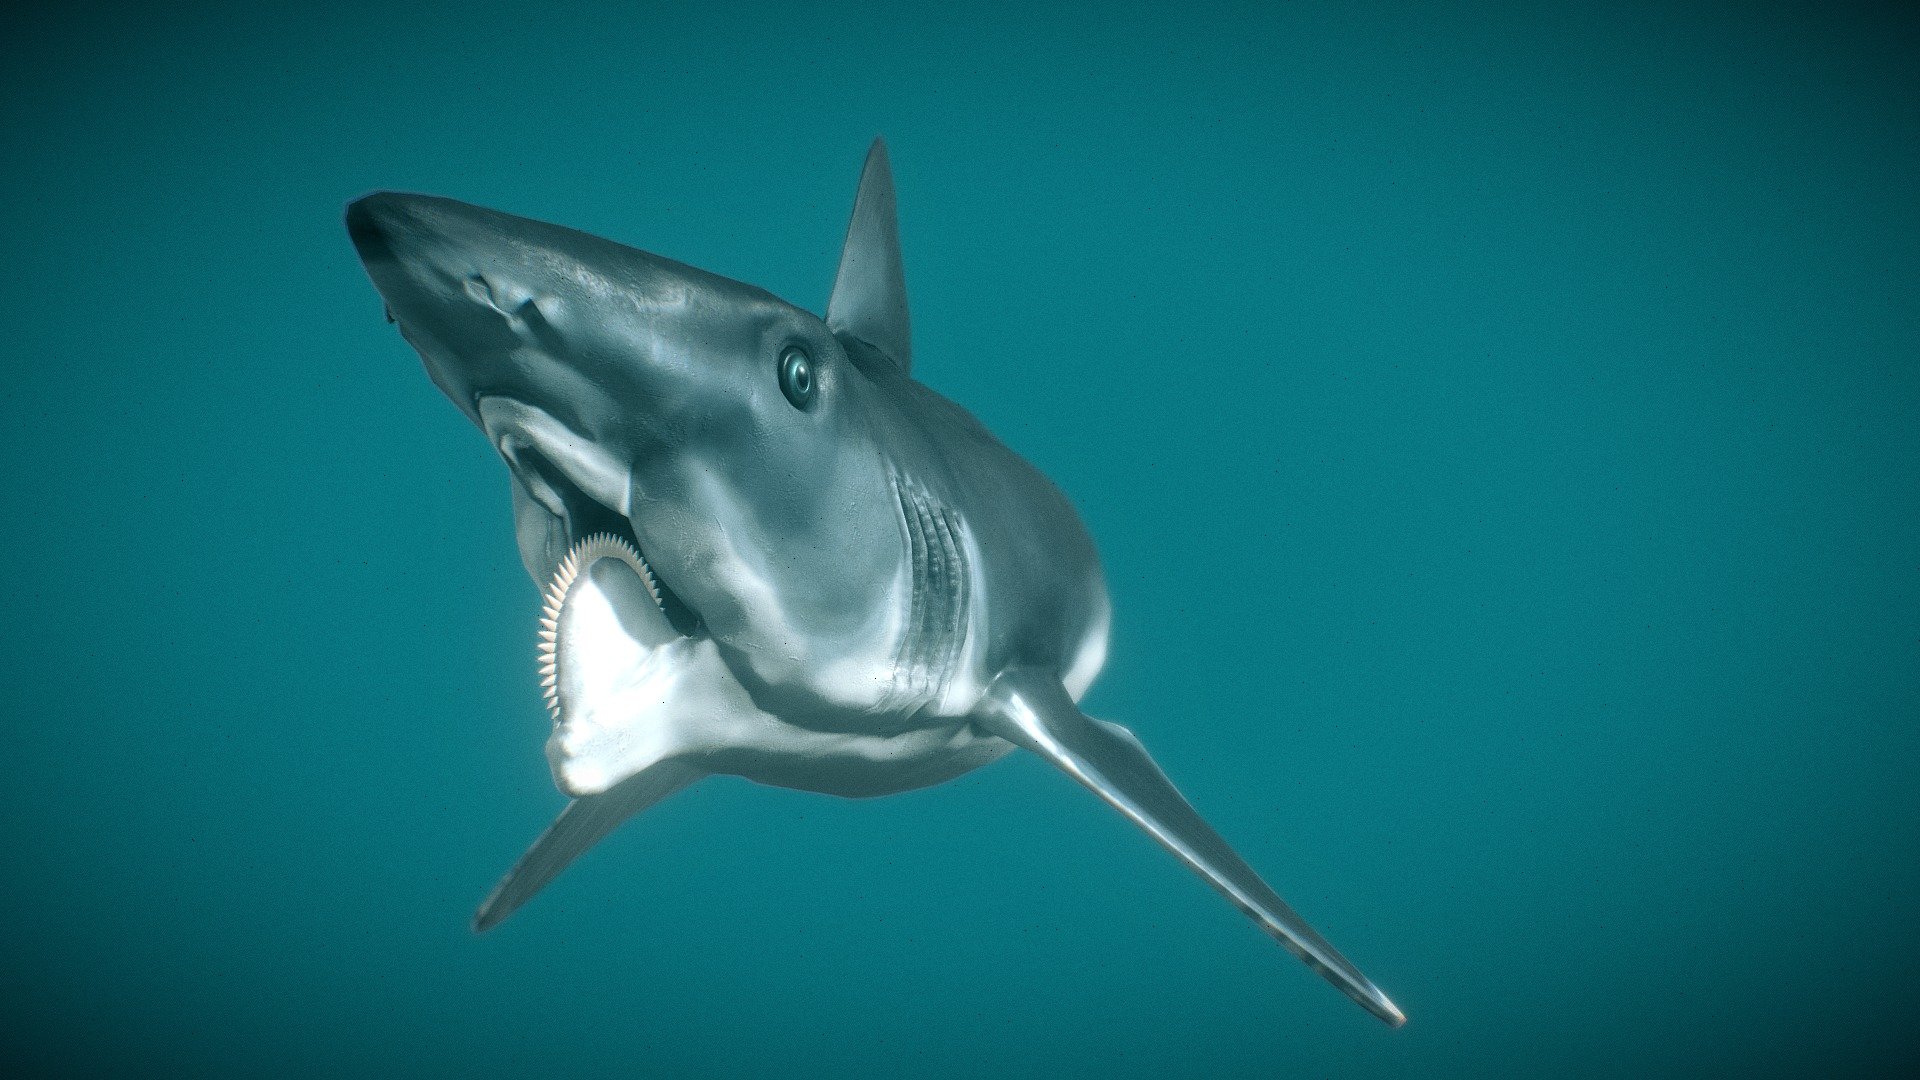 Helicoprion Bessonowi is a species eugeneodont fish that lived during the Early Permian(290–270 million years ago). Fossils of Helicoprion Bessonowi have been found in Russia, Japan, and Kazakhstan 3d model